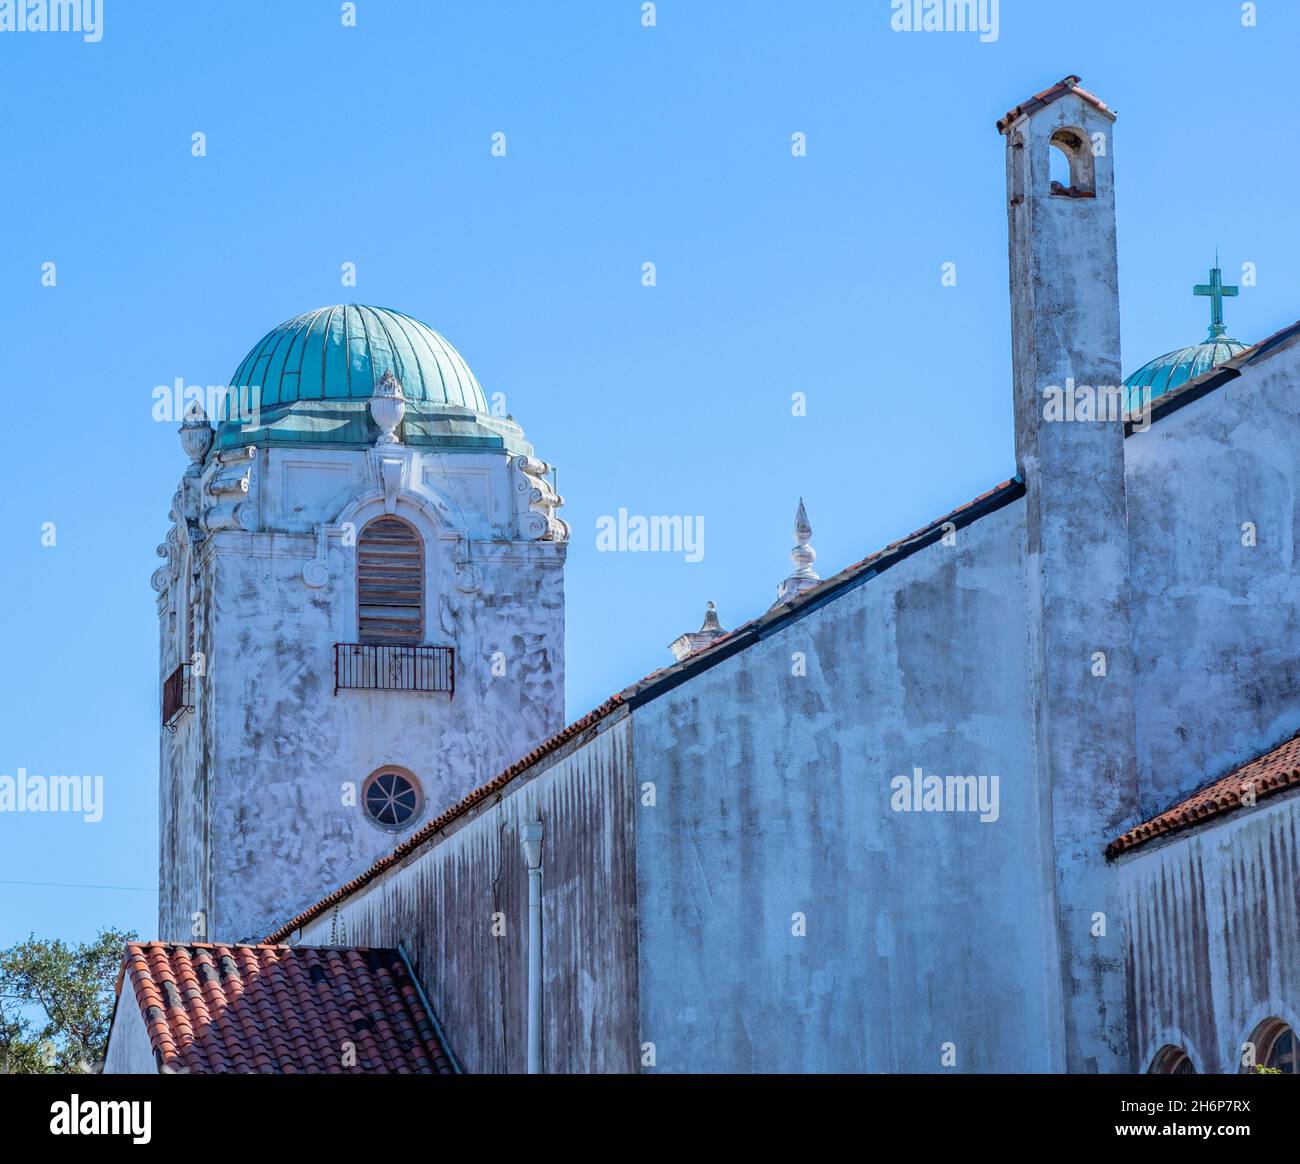 NEW ORLEANS, LA, USA - NOVEMBER 13, 2021: Towers and tiled roof of Our Lady of Lourdes Catholic Church on Napoleon Avenue Stock Photo